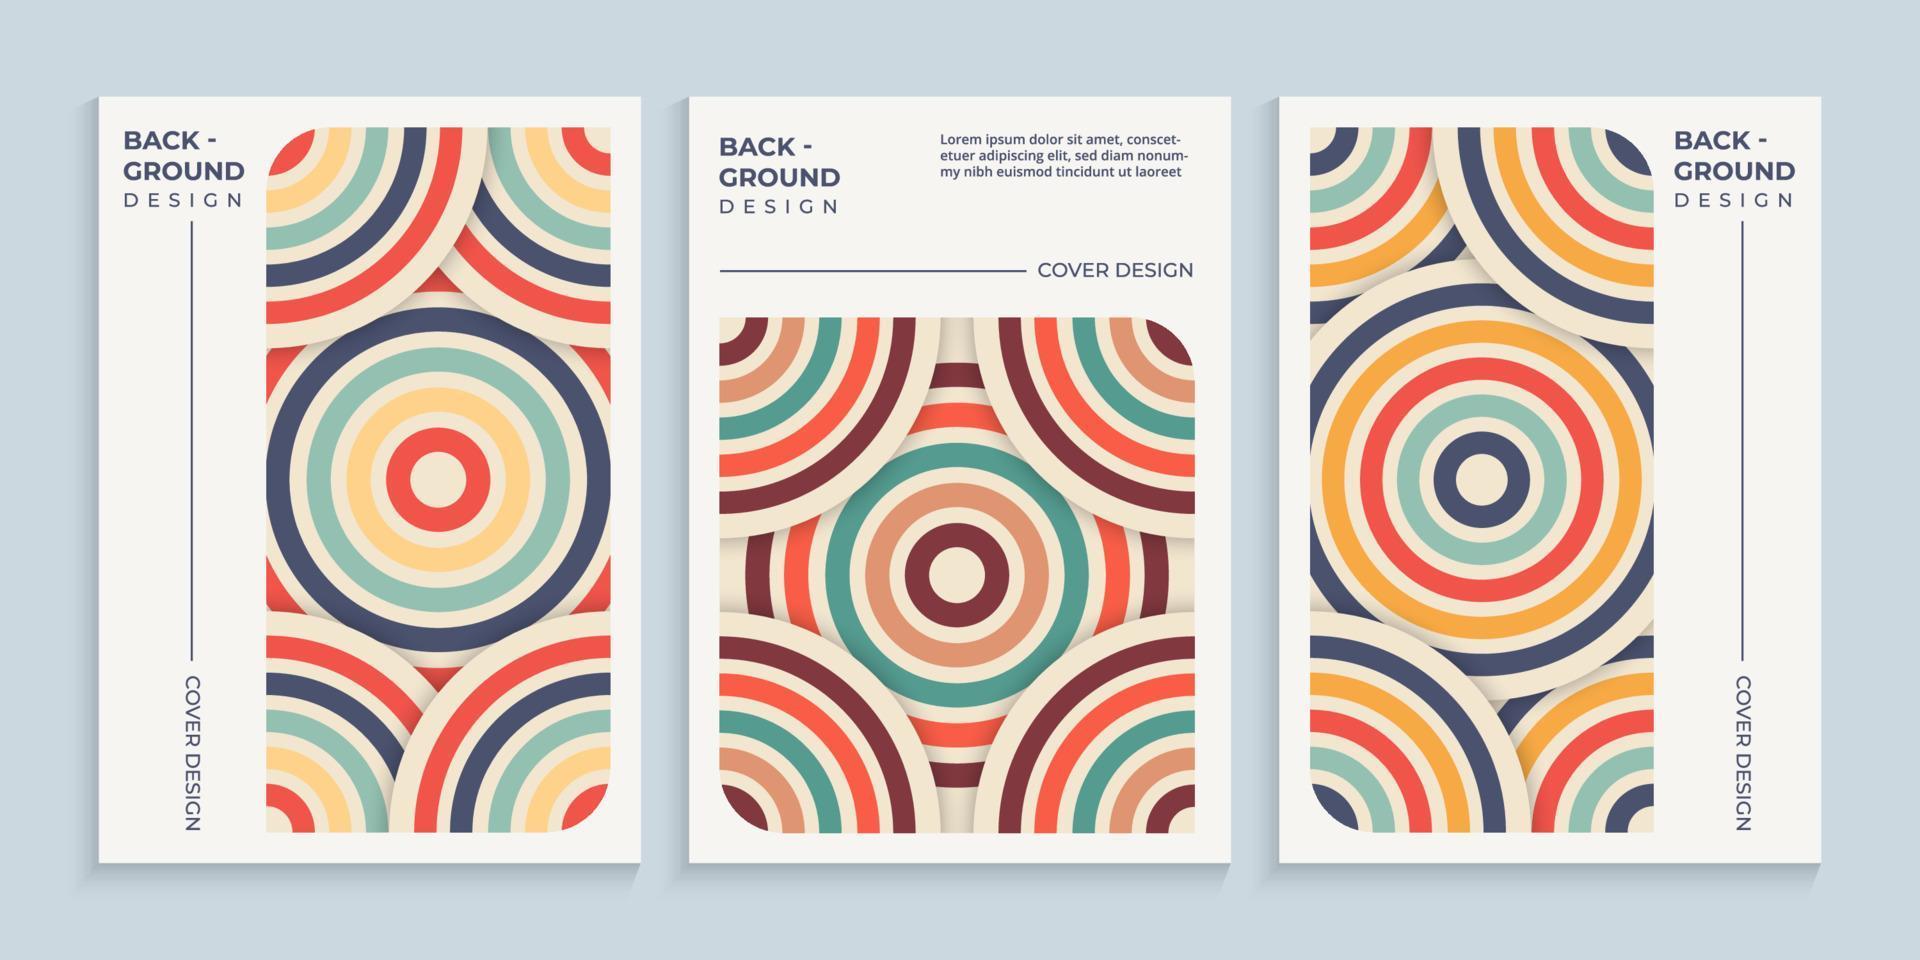 Vintage overlapping circles cover design with retro colors vector